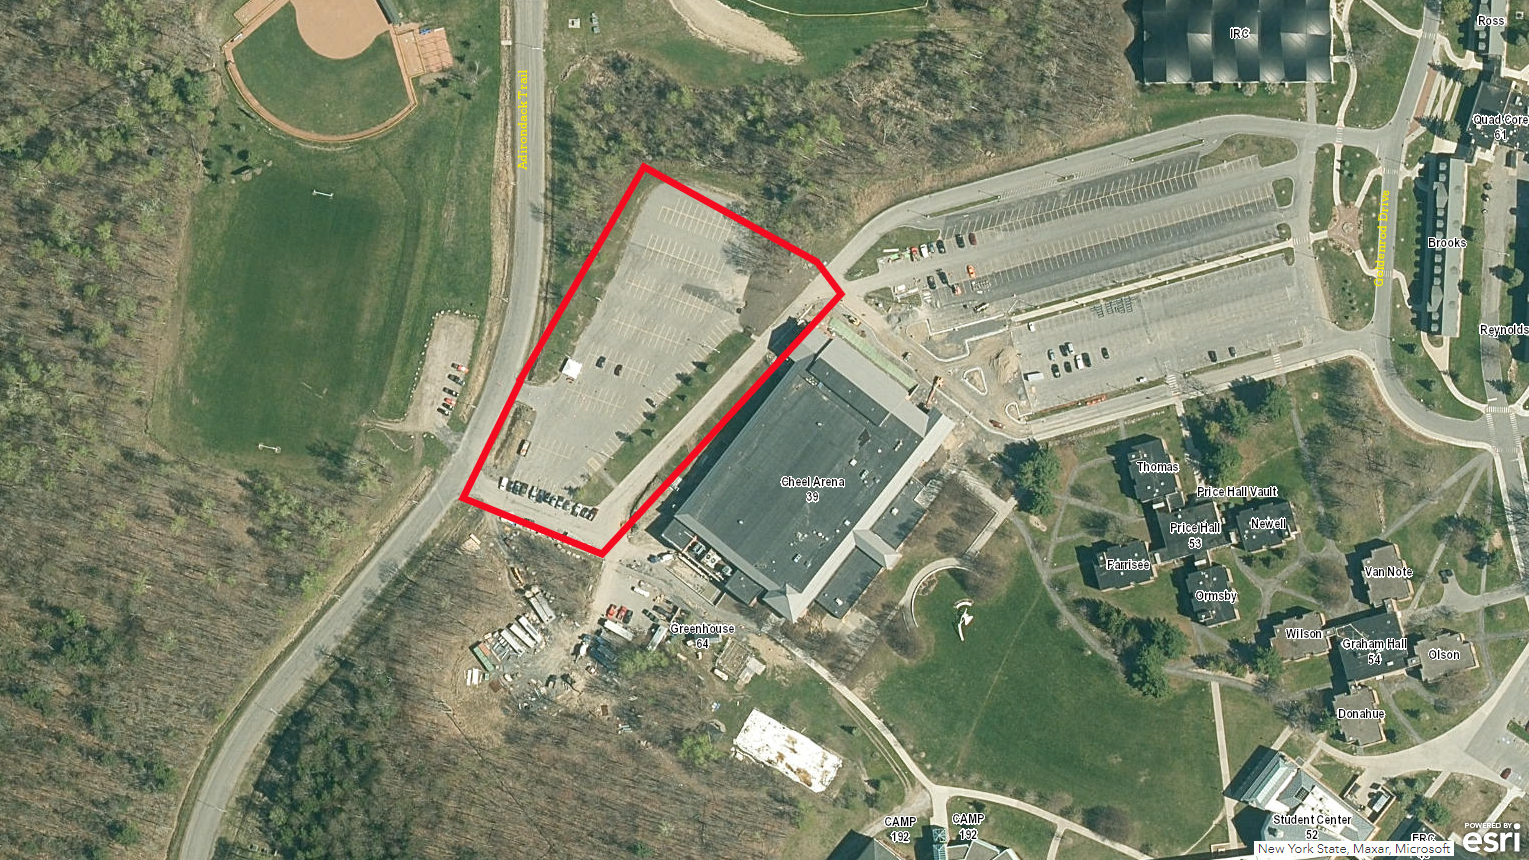 An aerial view of the Clarkson University Campus, with a red line indicated the back lot of Cheel parking lot